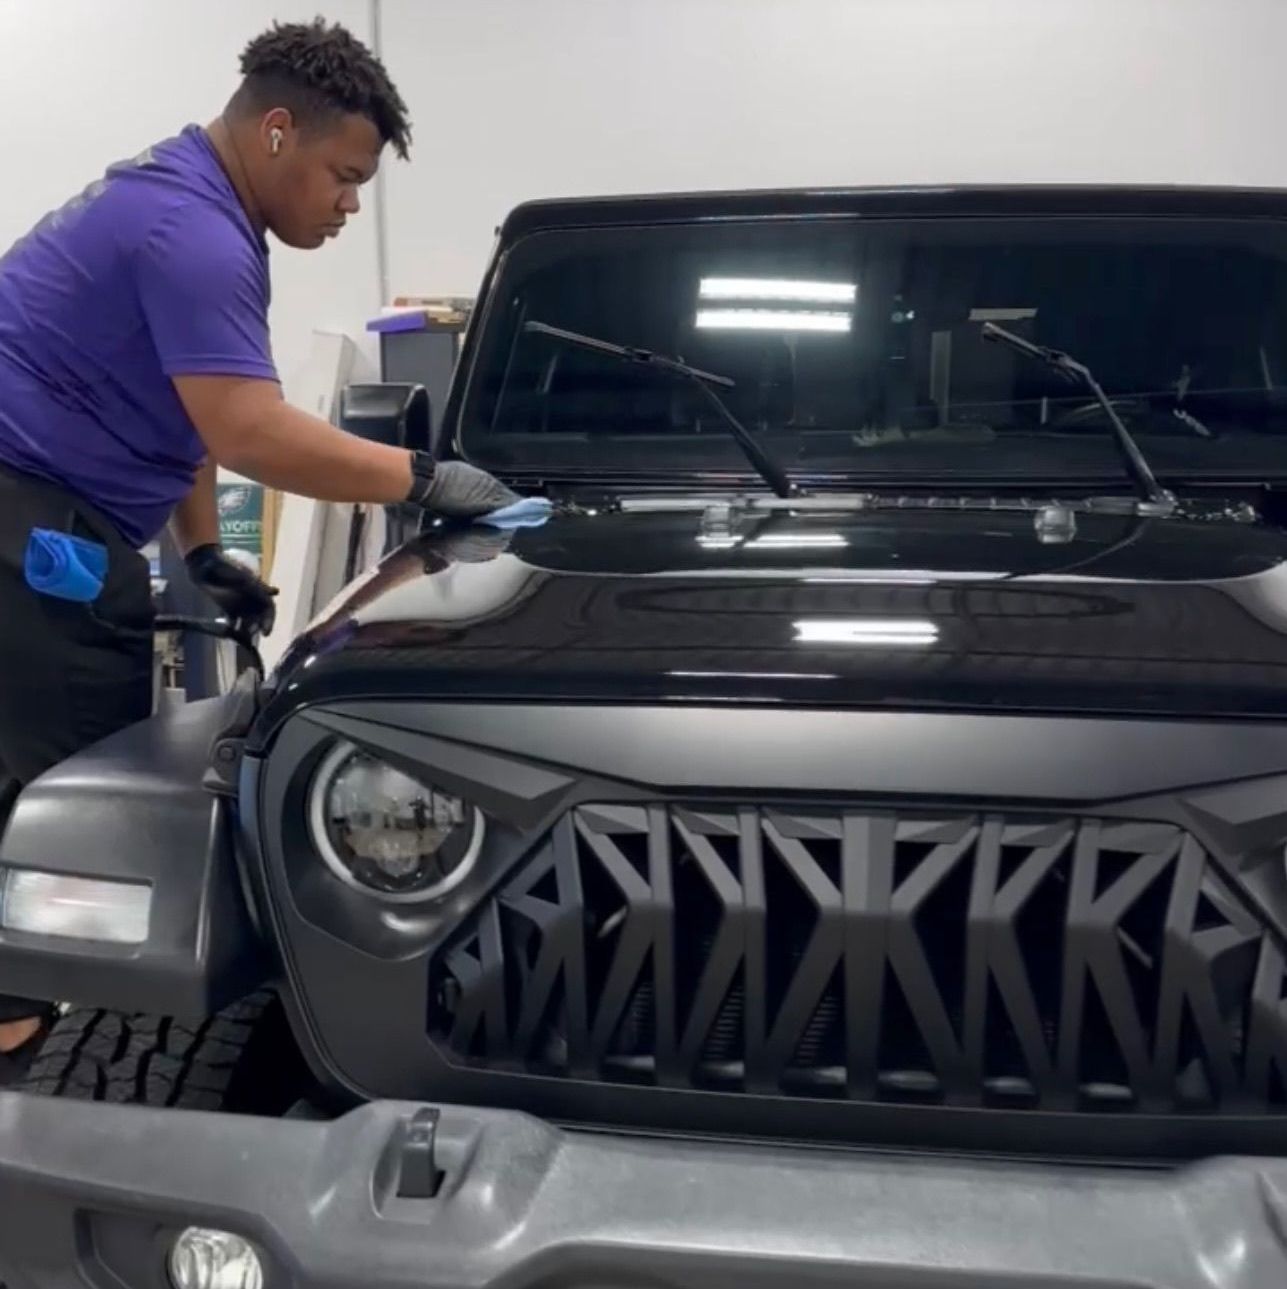 a man in a purple shirt is working on a jeep